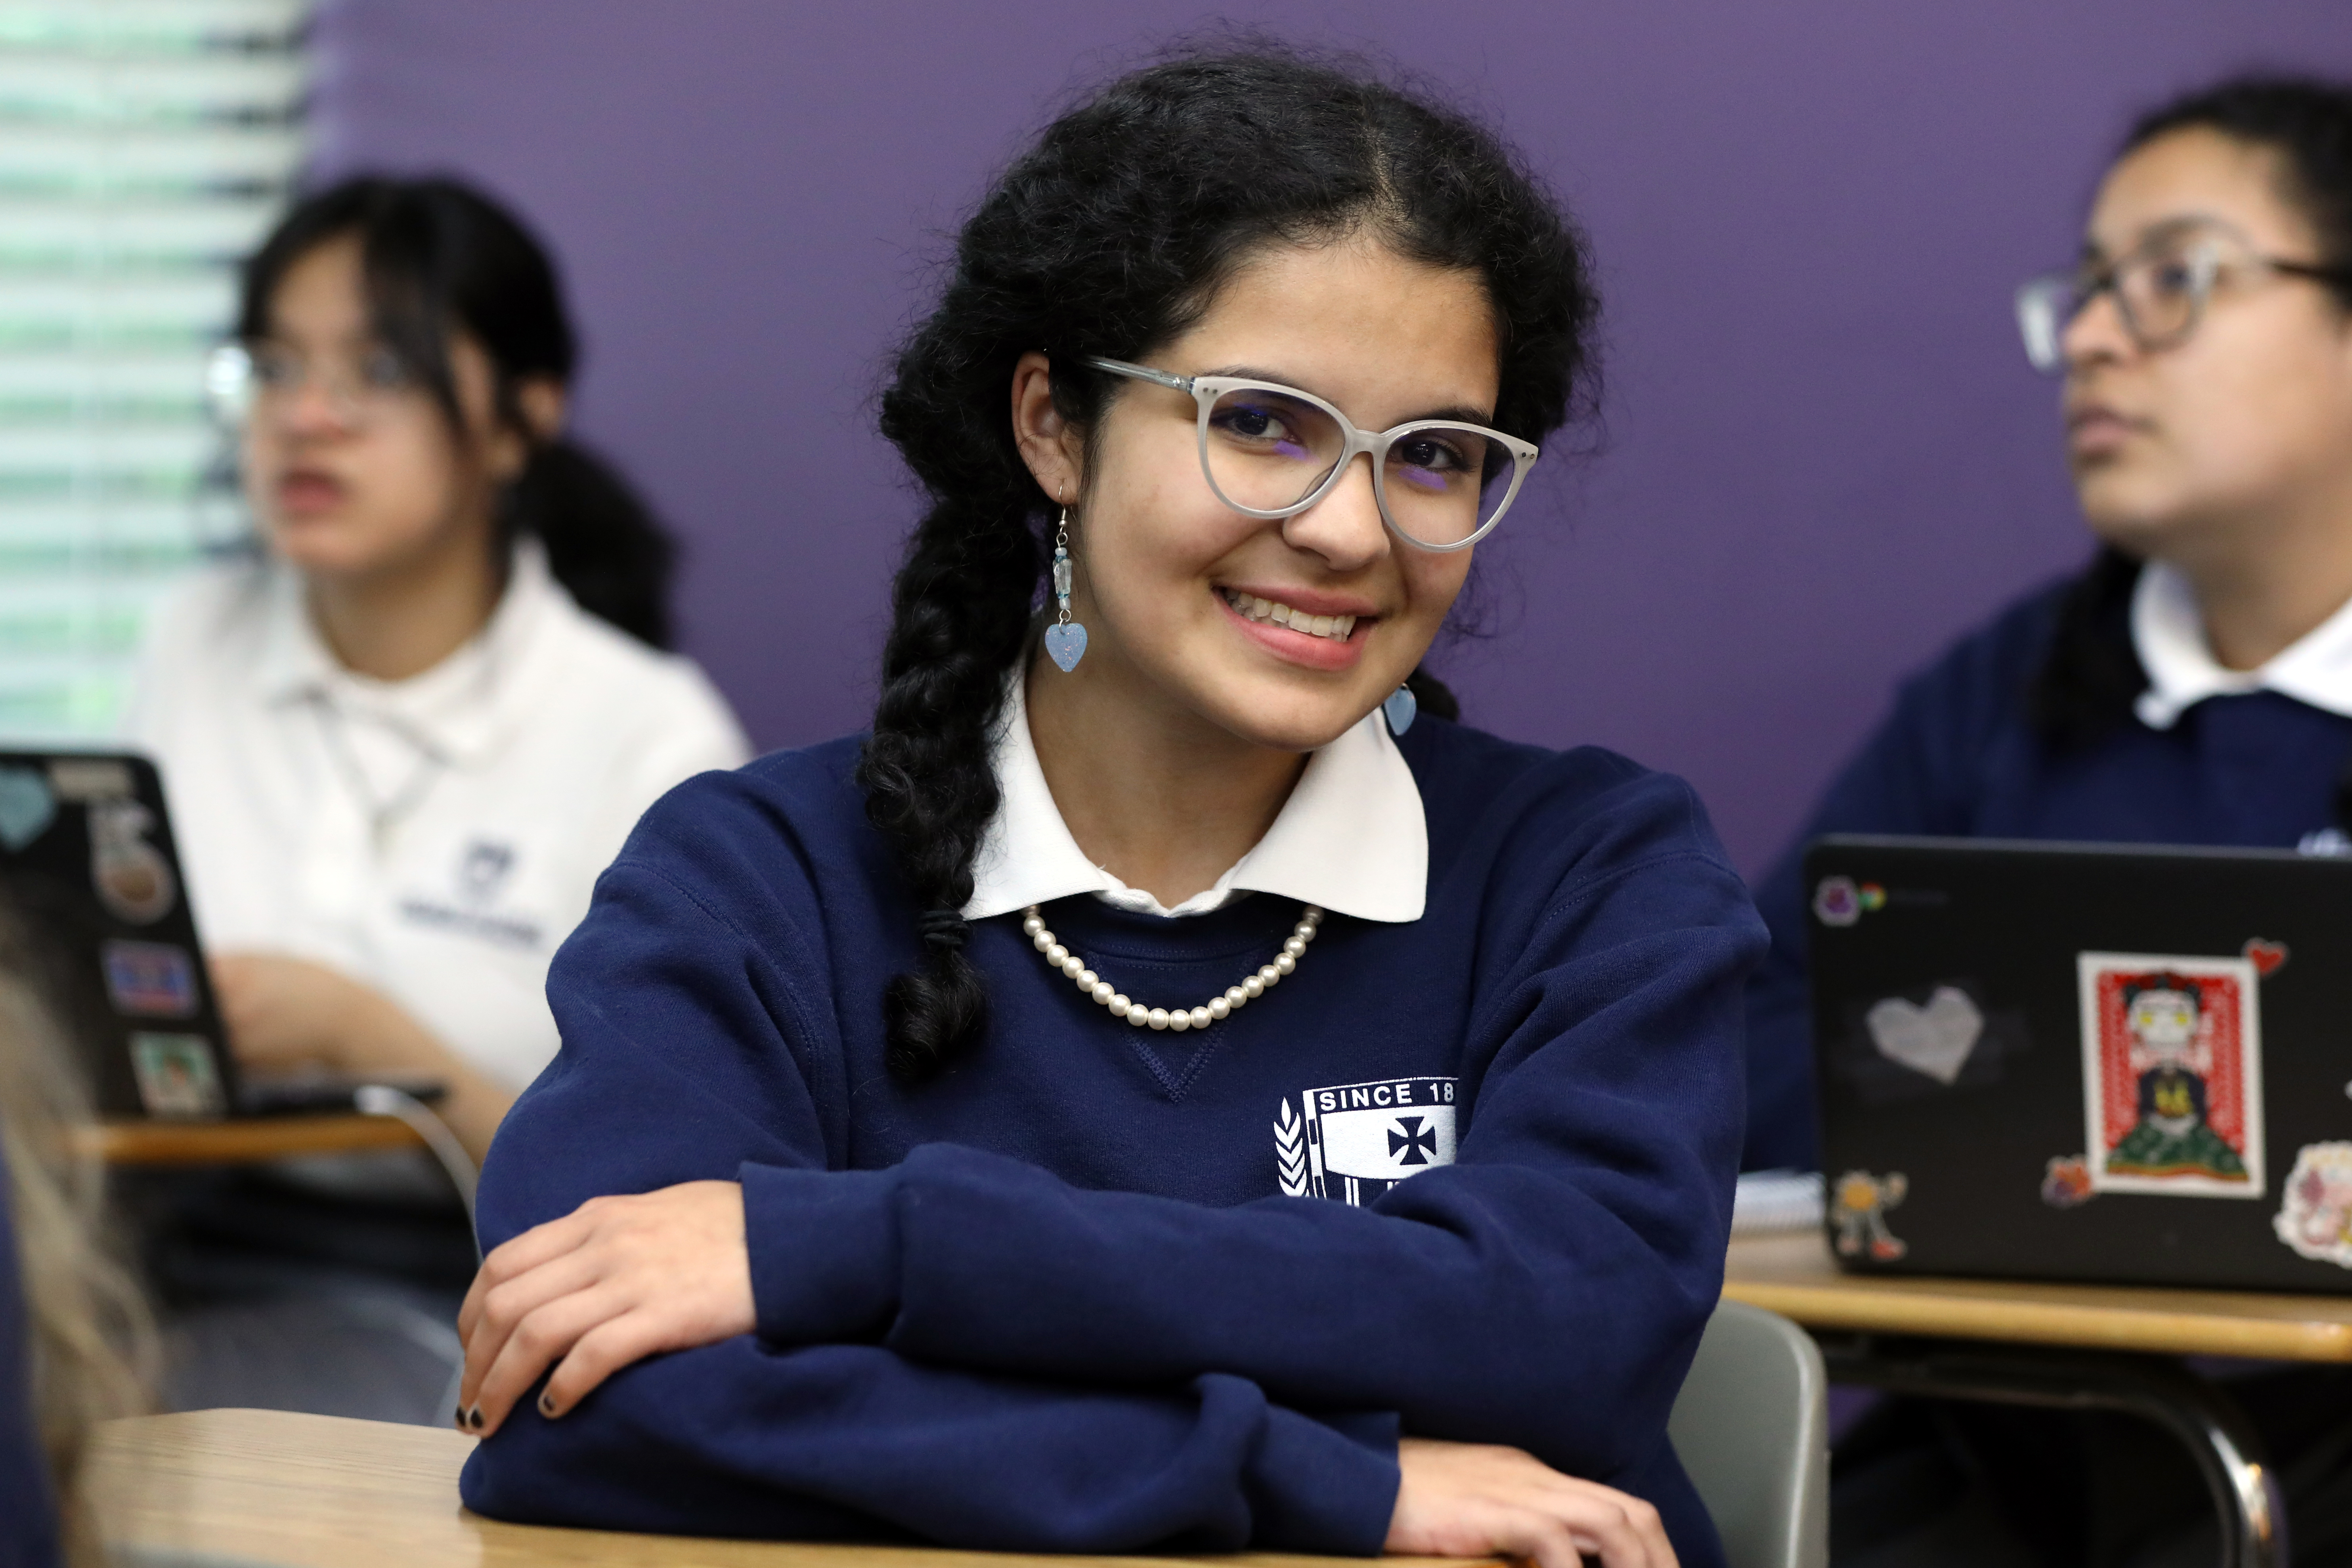 Image of student sitting at desk and smiling